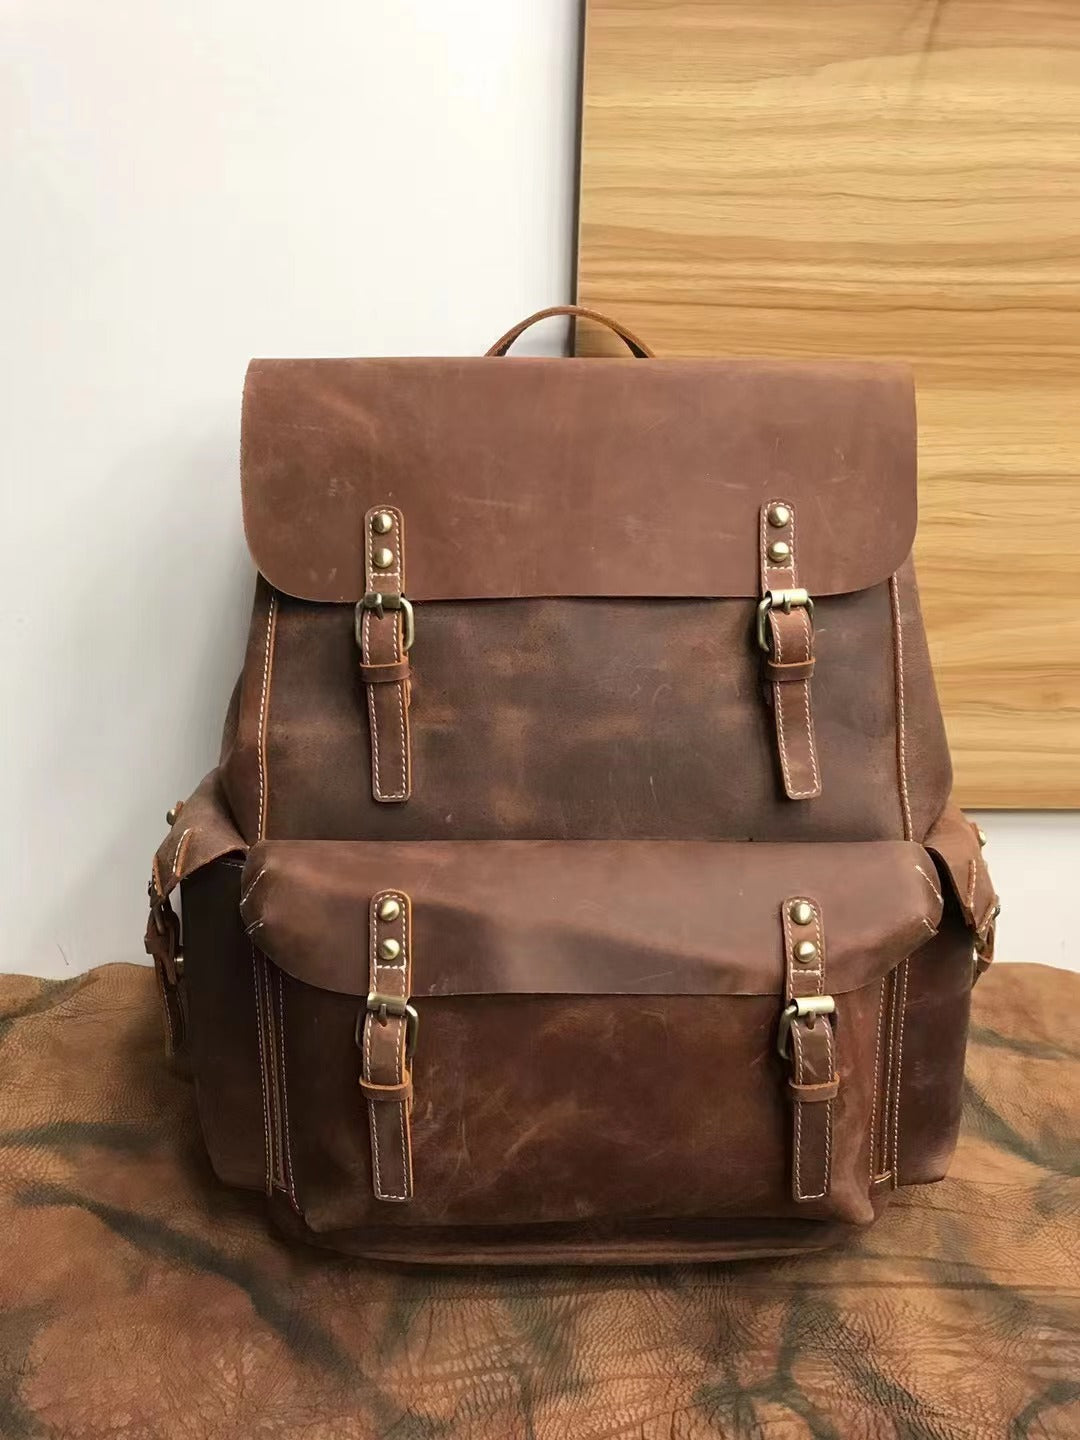 Fashionable Vintage Leather Backpack for Men's Travel and Daily Carry Woyaza